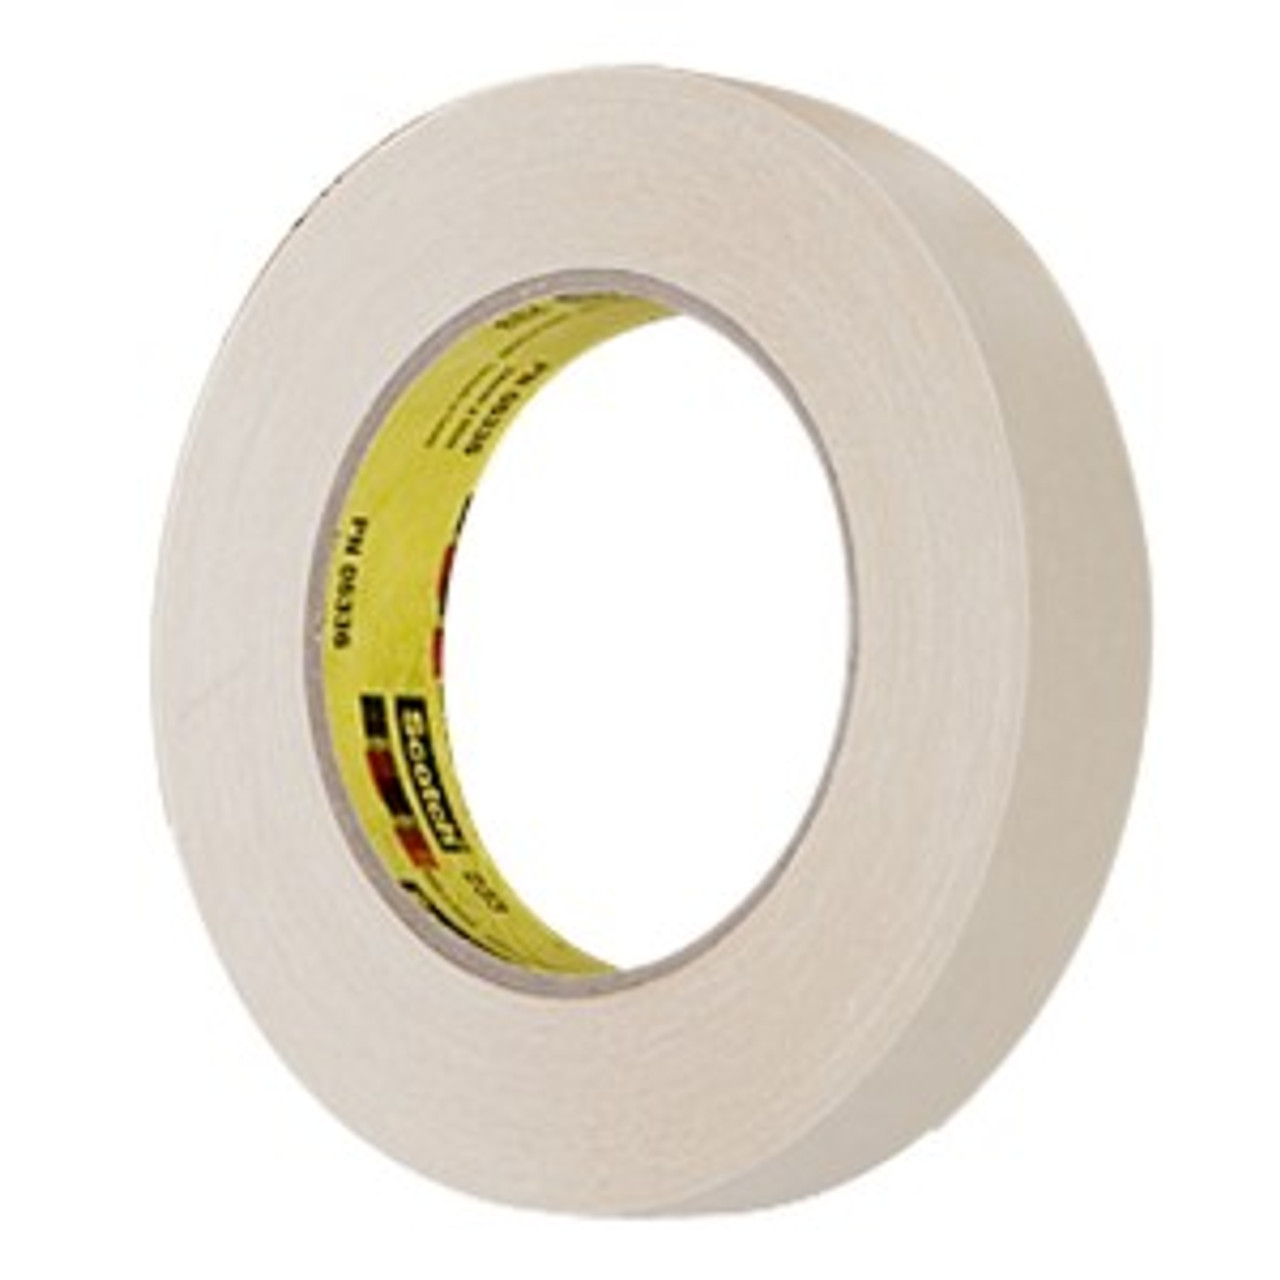 Scotch Performance Green Masking Tape 233, 48 mm width (1.9 inches